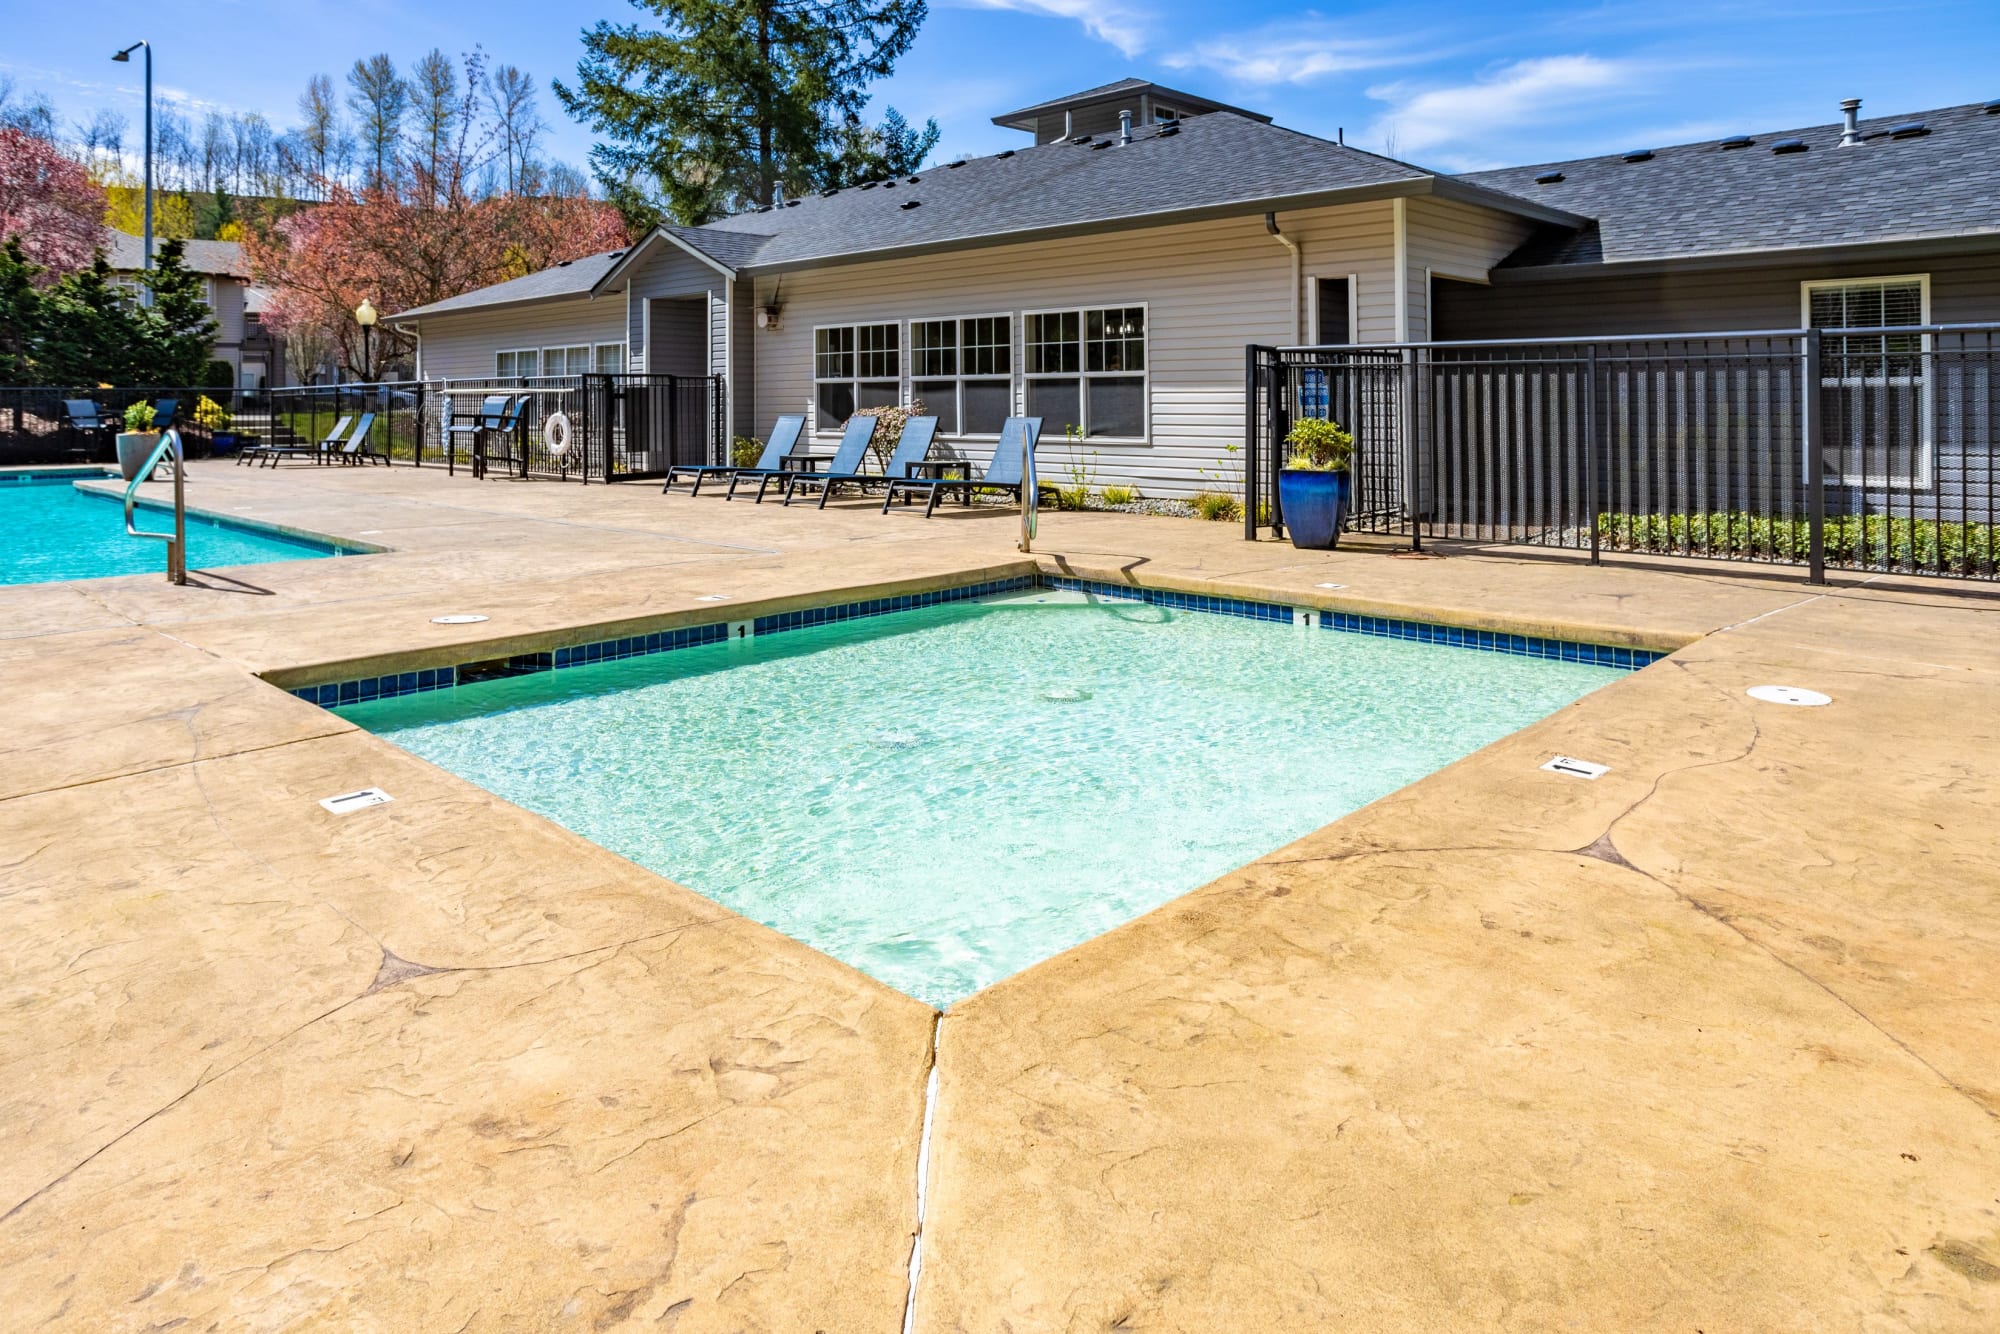 Fire pit and spa at Pebble Cove Apartments in Renton, Washington